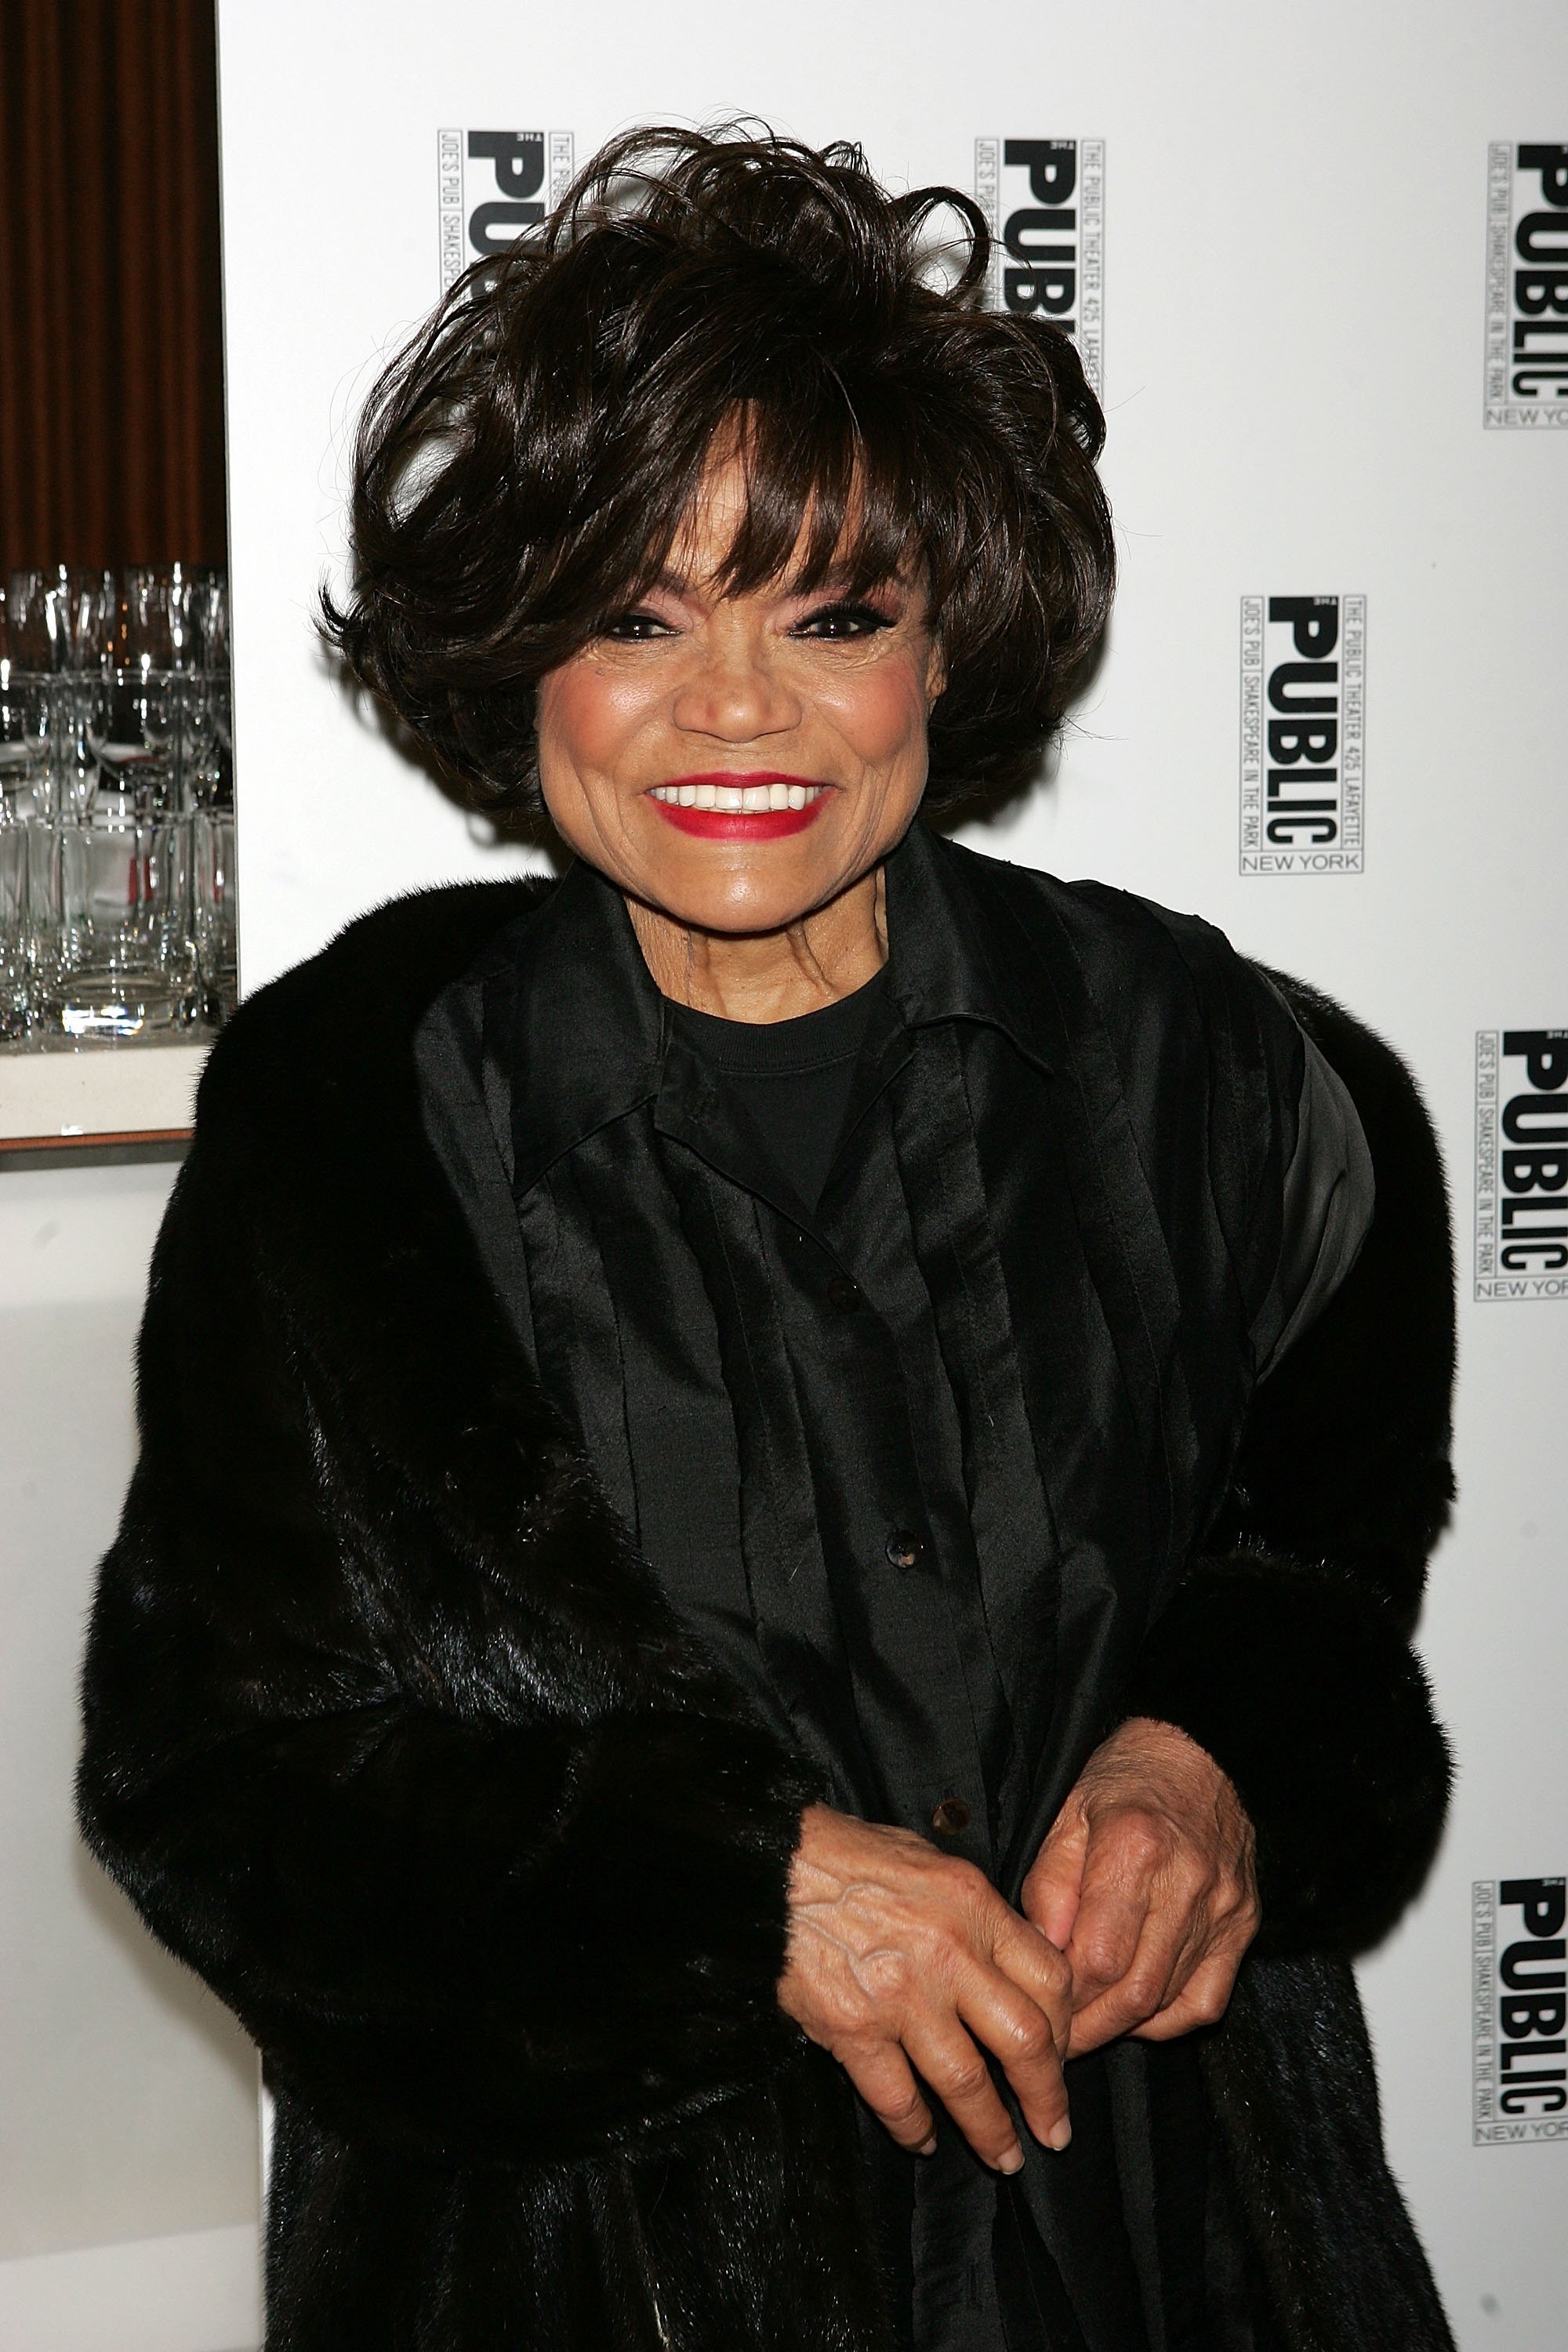 Eartha Kitt at the after-party for "The Public Sings: A 50th Anniversary Celebration" at the Time Warner Center January 30, 2006, in New York City | Photo: Getty Images